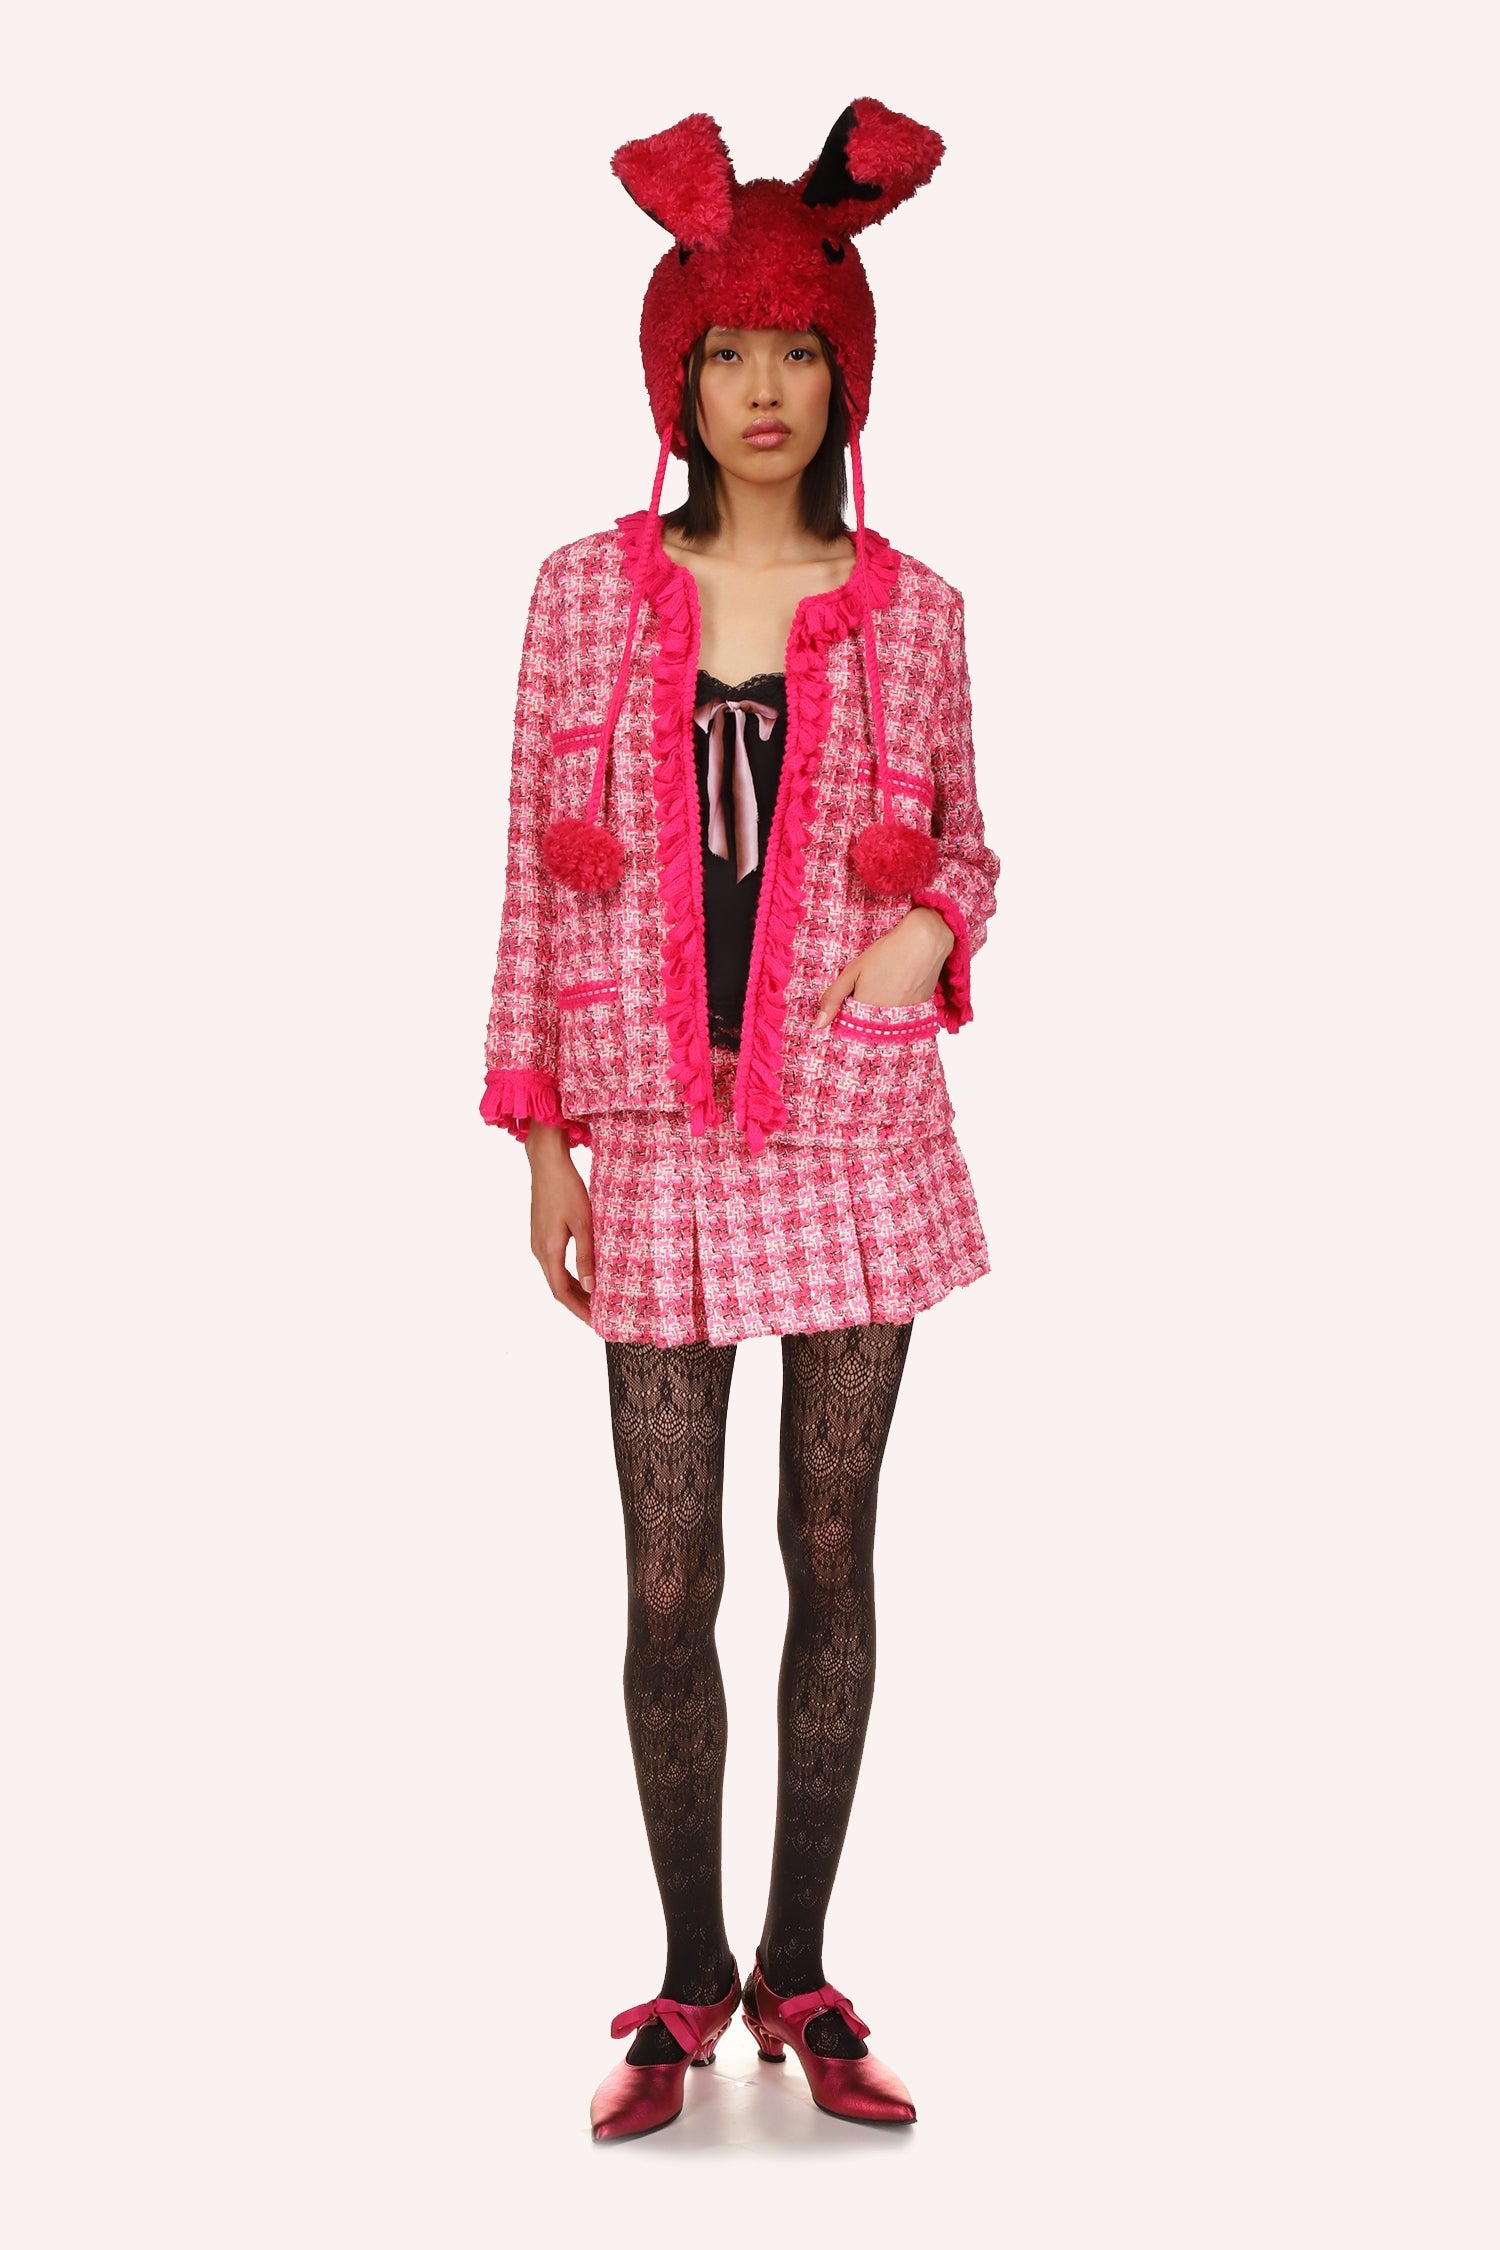 The Anna Sui’s Ribbon Chenille Tweed Jacket Bubblegum Pink Multi is a hip-length jacket in a soft pink shade